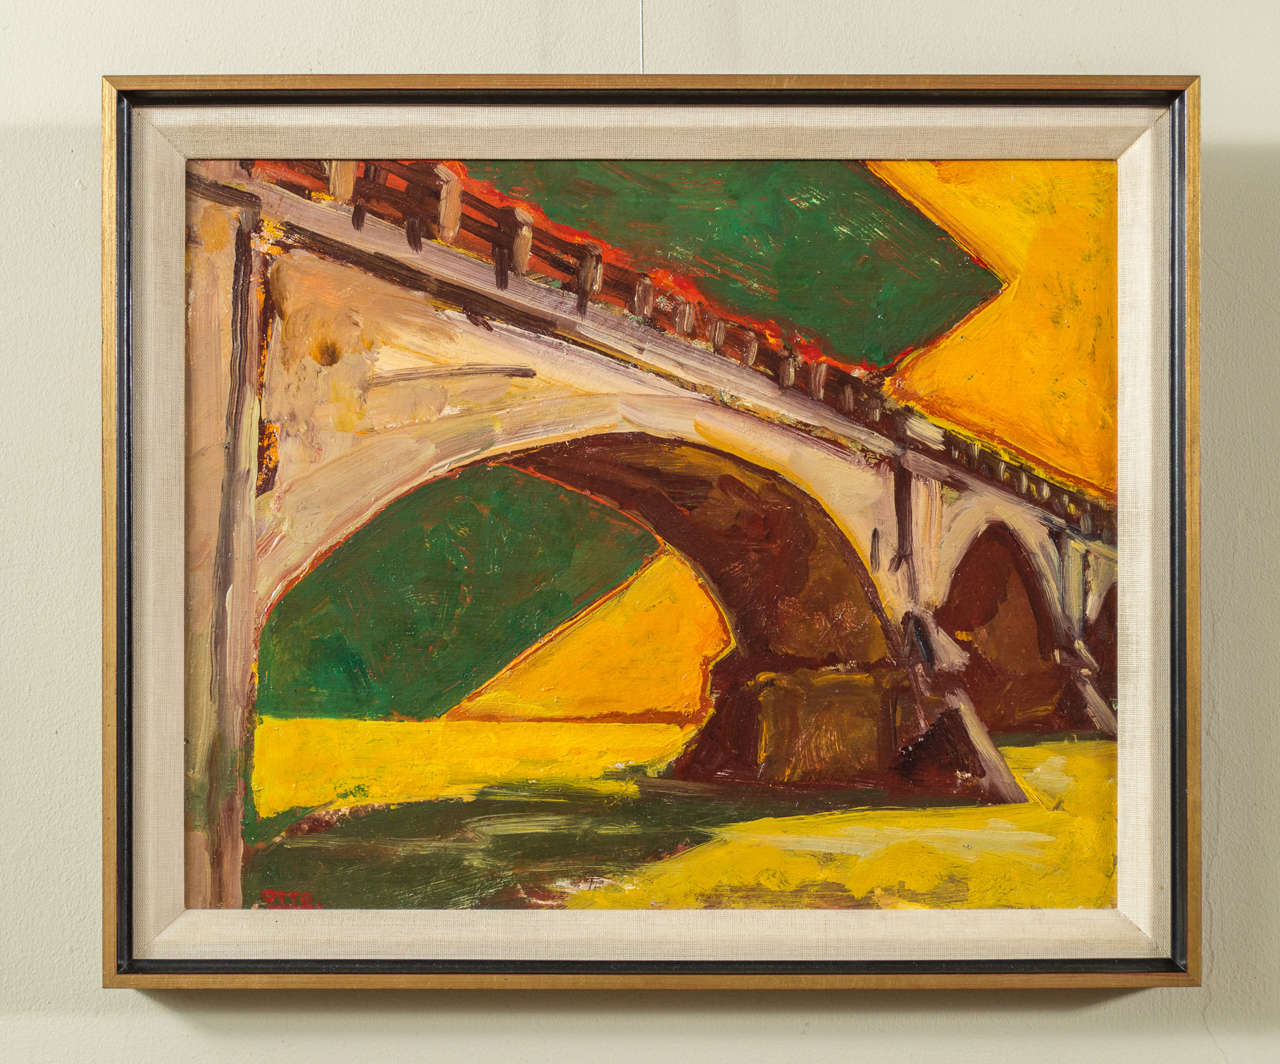 A bright oil on board by Clay Otto, Born in Burlington, IA on Nov. 28, 1891. Otto studied at Columbia University and was active as an architect in NYC prior to WWI. After the War he remained in France to study at Académie Julian. He moved to